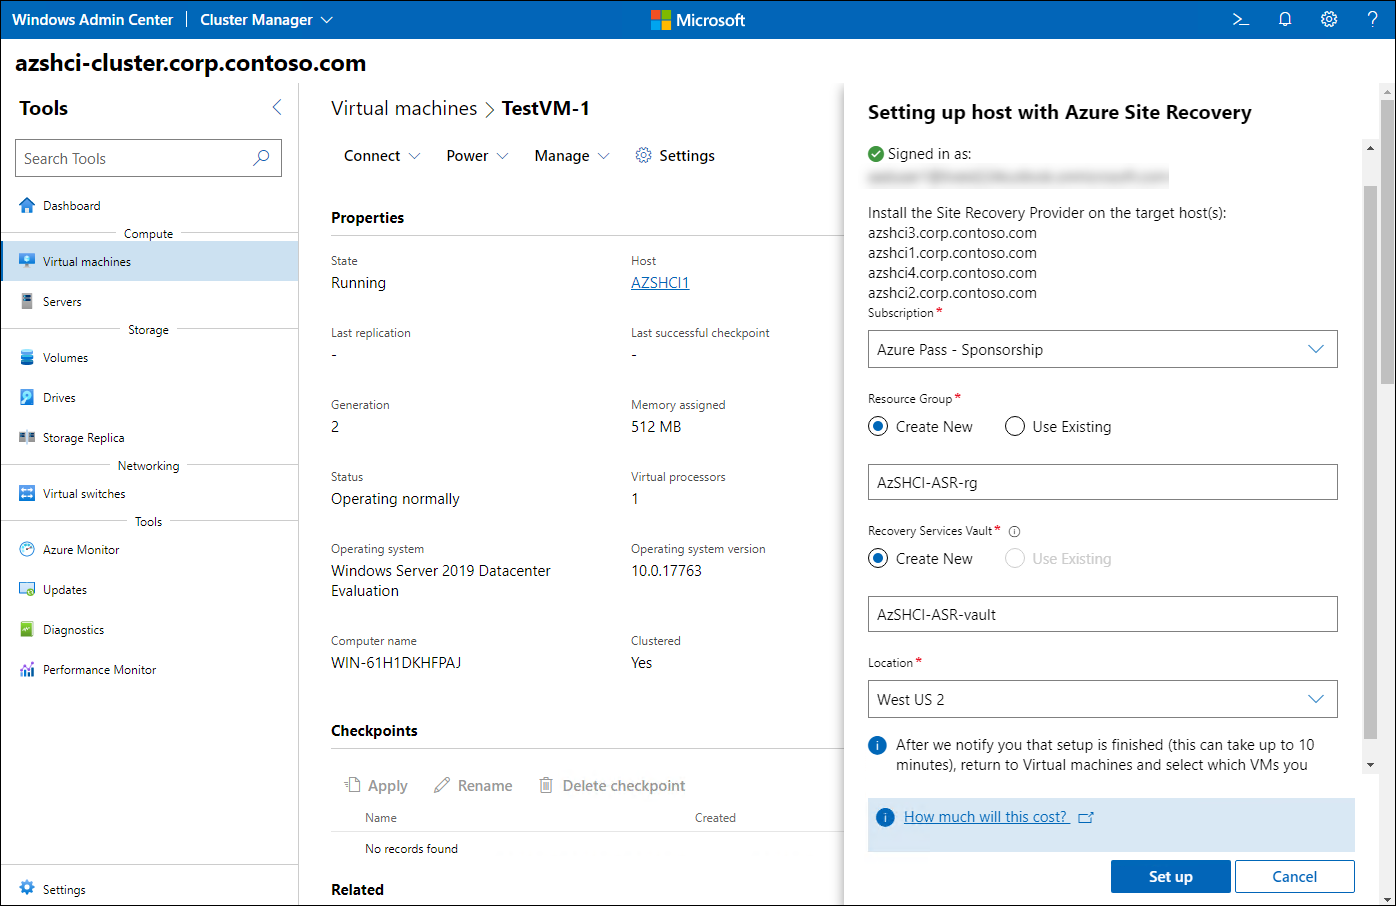 The screenshot depicts how Windows Admin Center offers the option to onboard an Azure Stack HCI cluster to Azure Site Recovery, which automatically provisions all required Azure components, including the target Azure Recovery Services vault and the storage account required for replication, and installs the Site Recovery Provider on the cluster nodes.